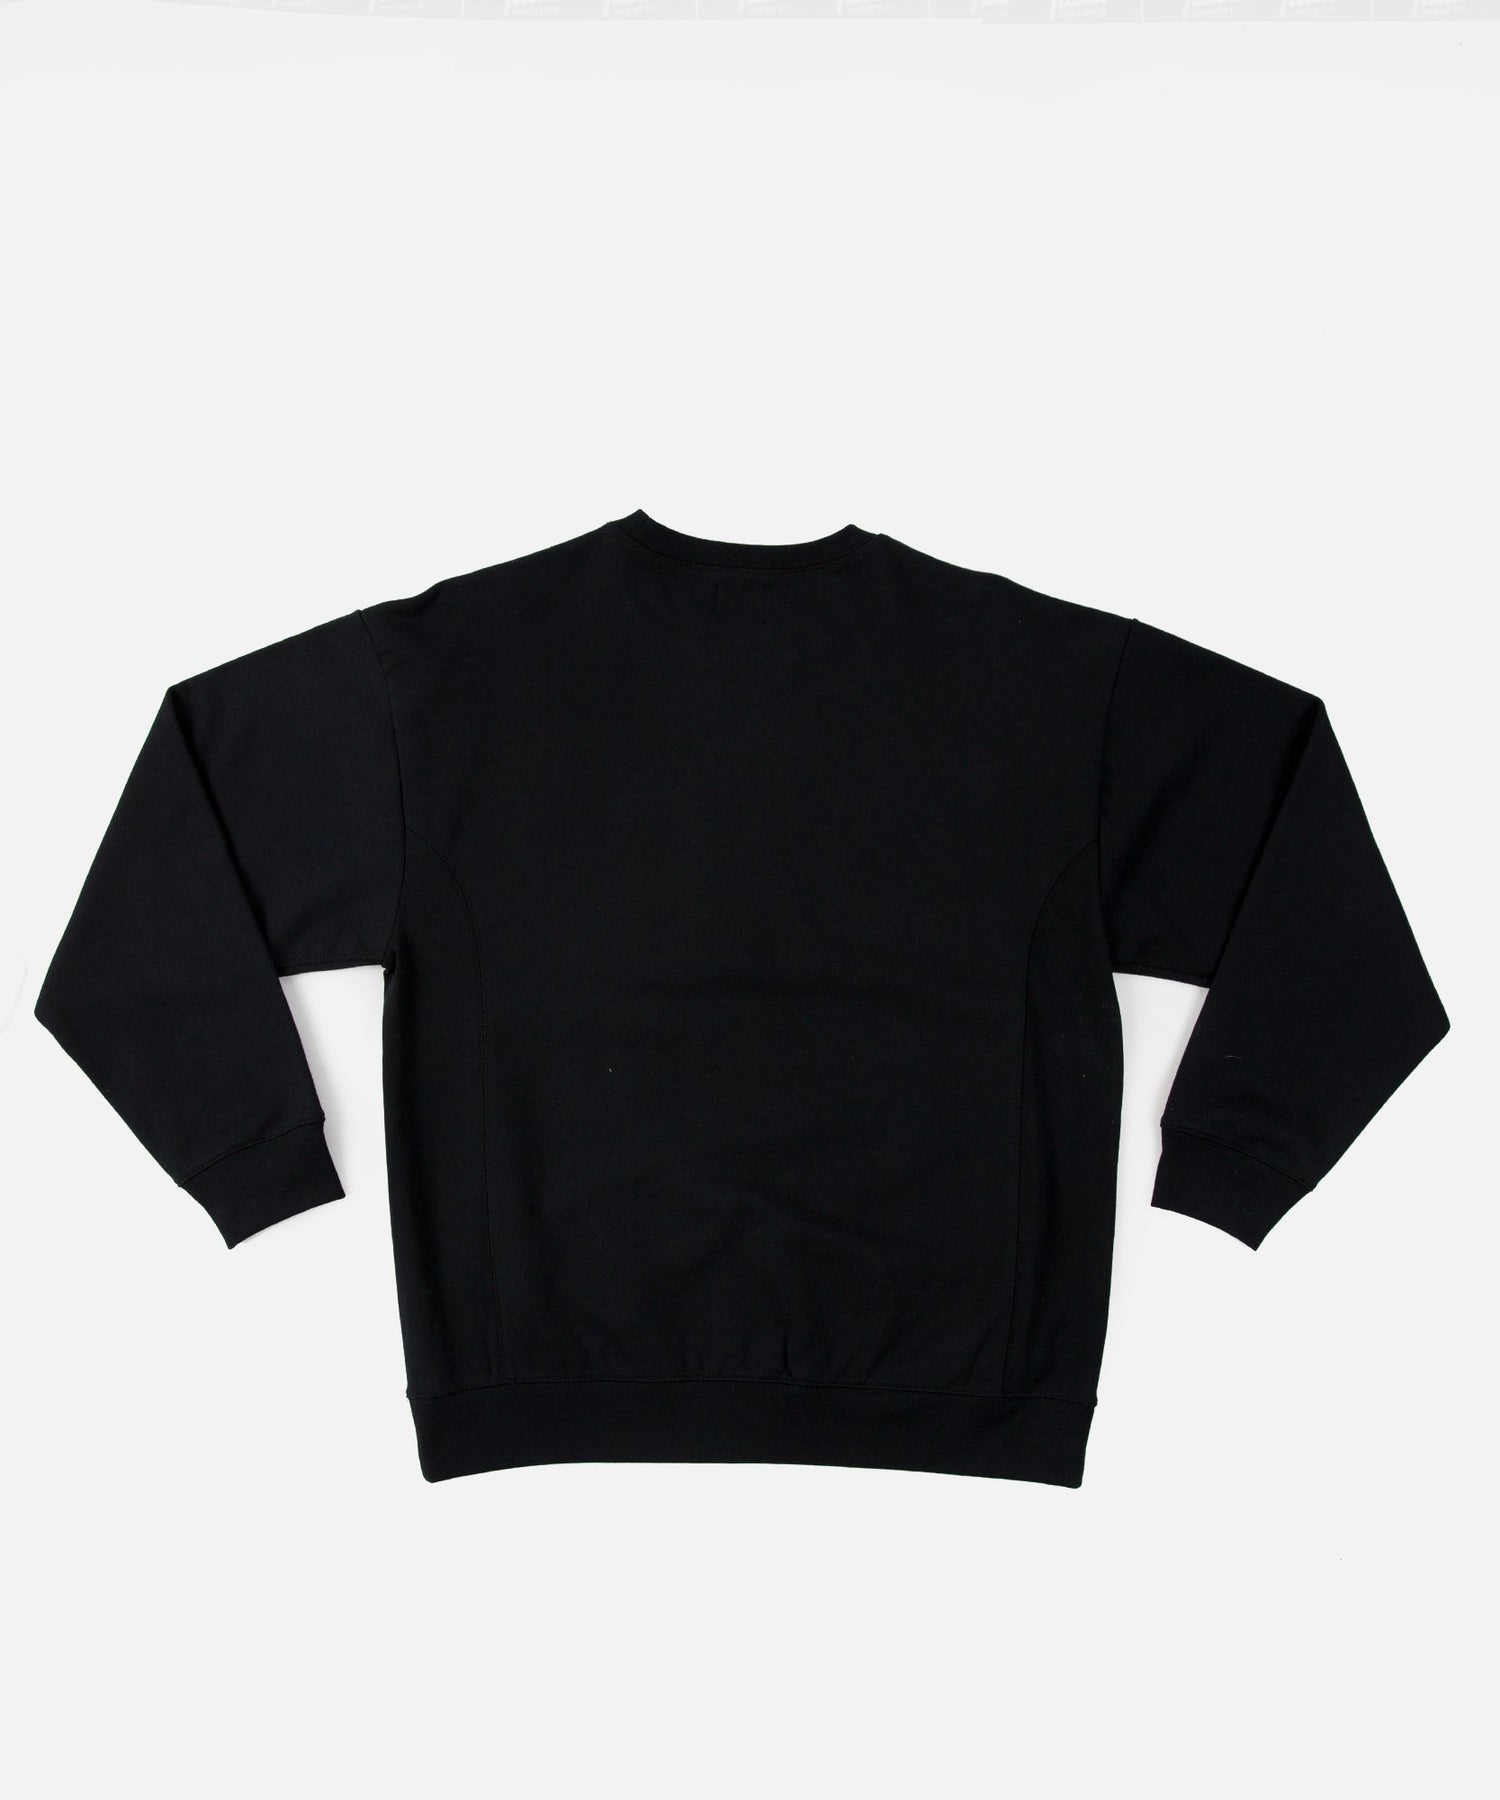 IN-STORE EXCLUSIVE: Patta London Chapter Crewneck Sweater (Black)